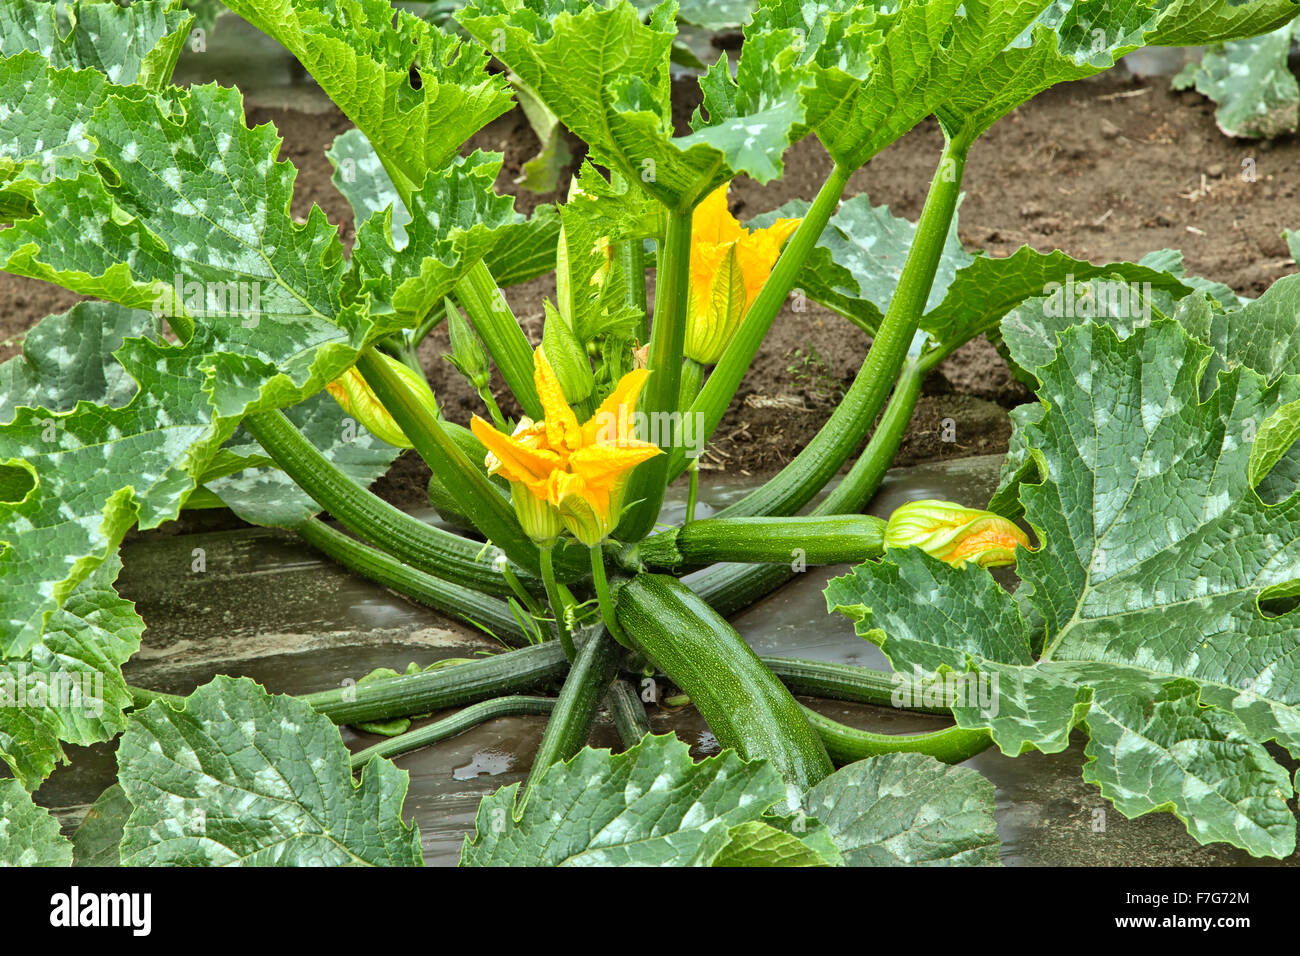 Zucchini Plant with fruit, female & male flowers. Stock Photo